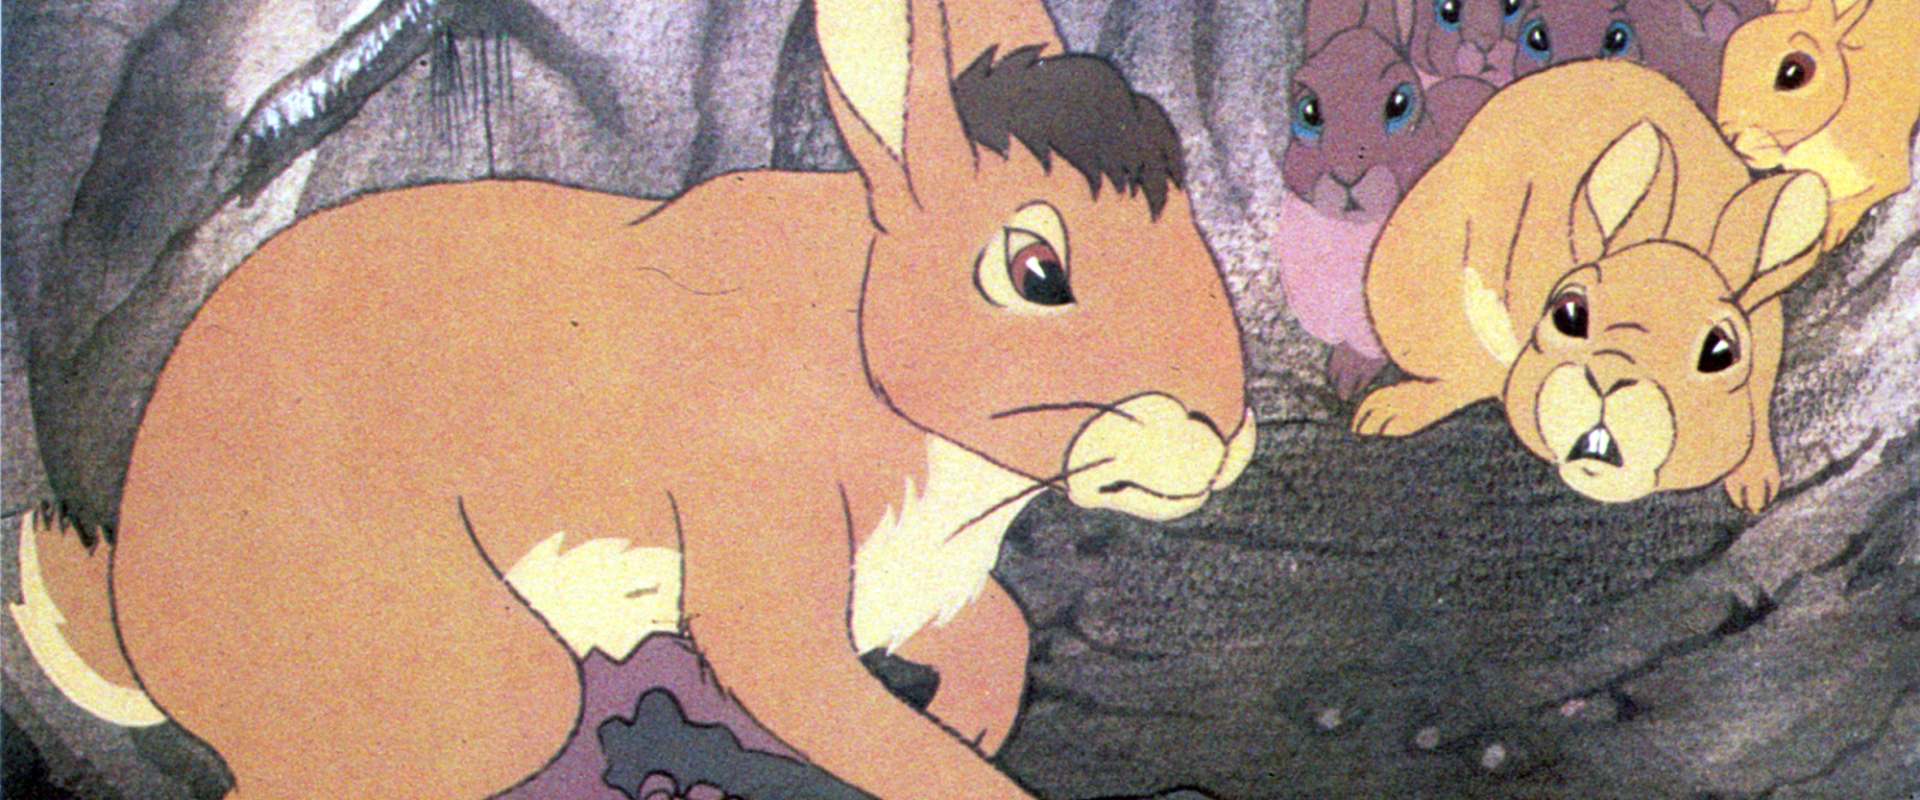 Watership Down background 1